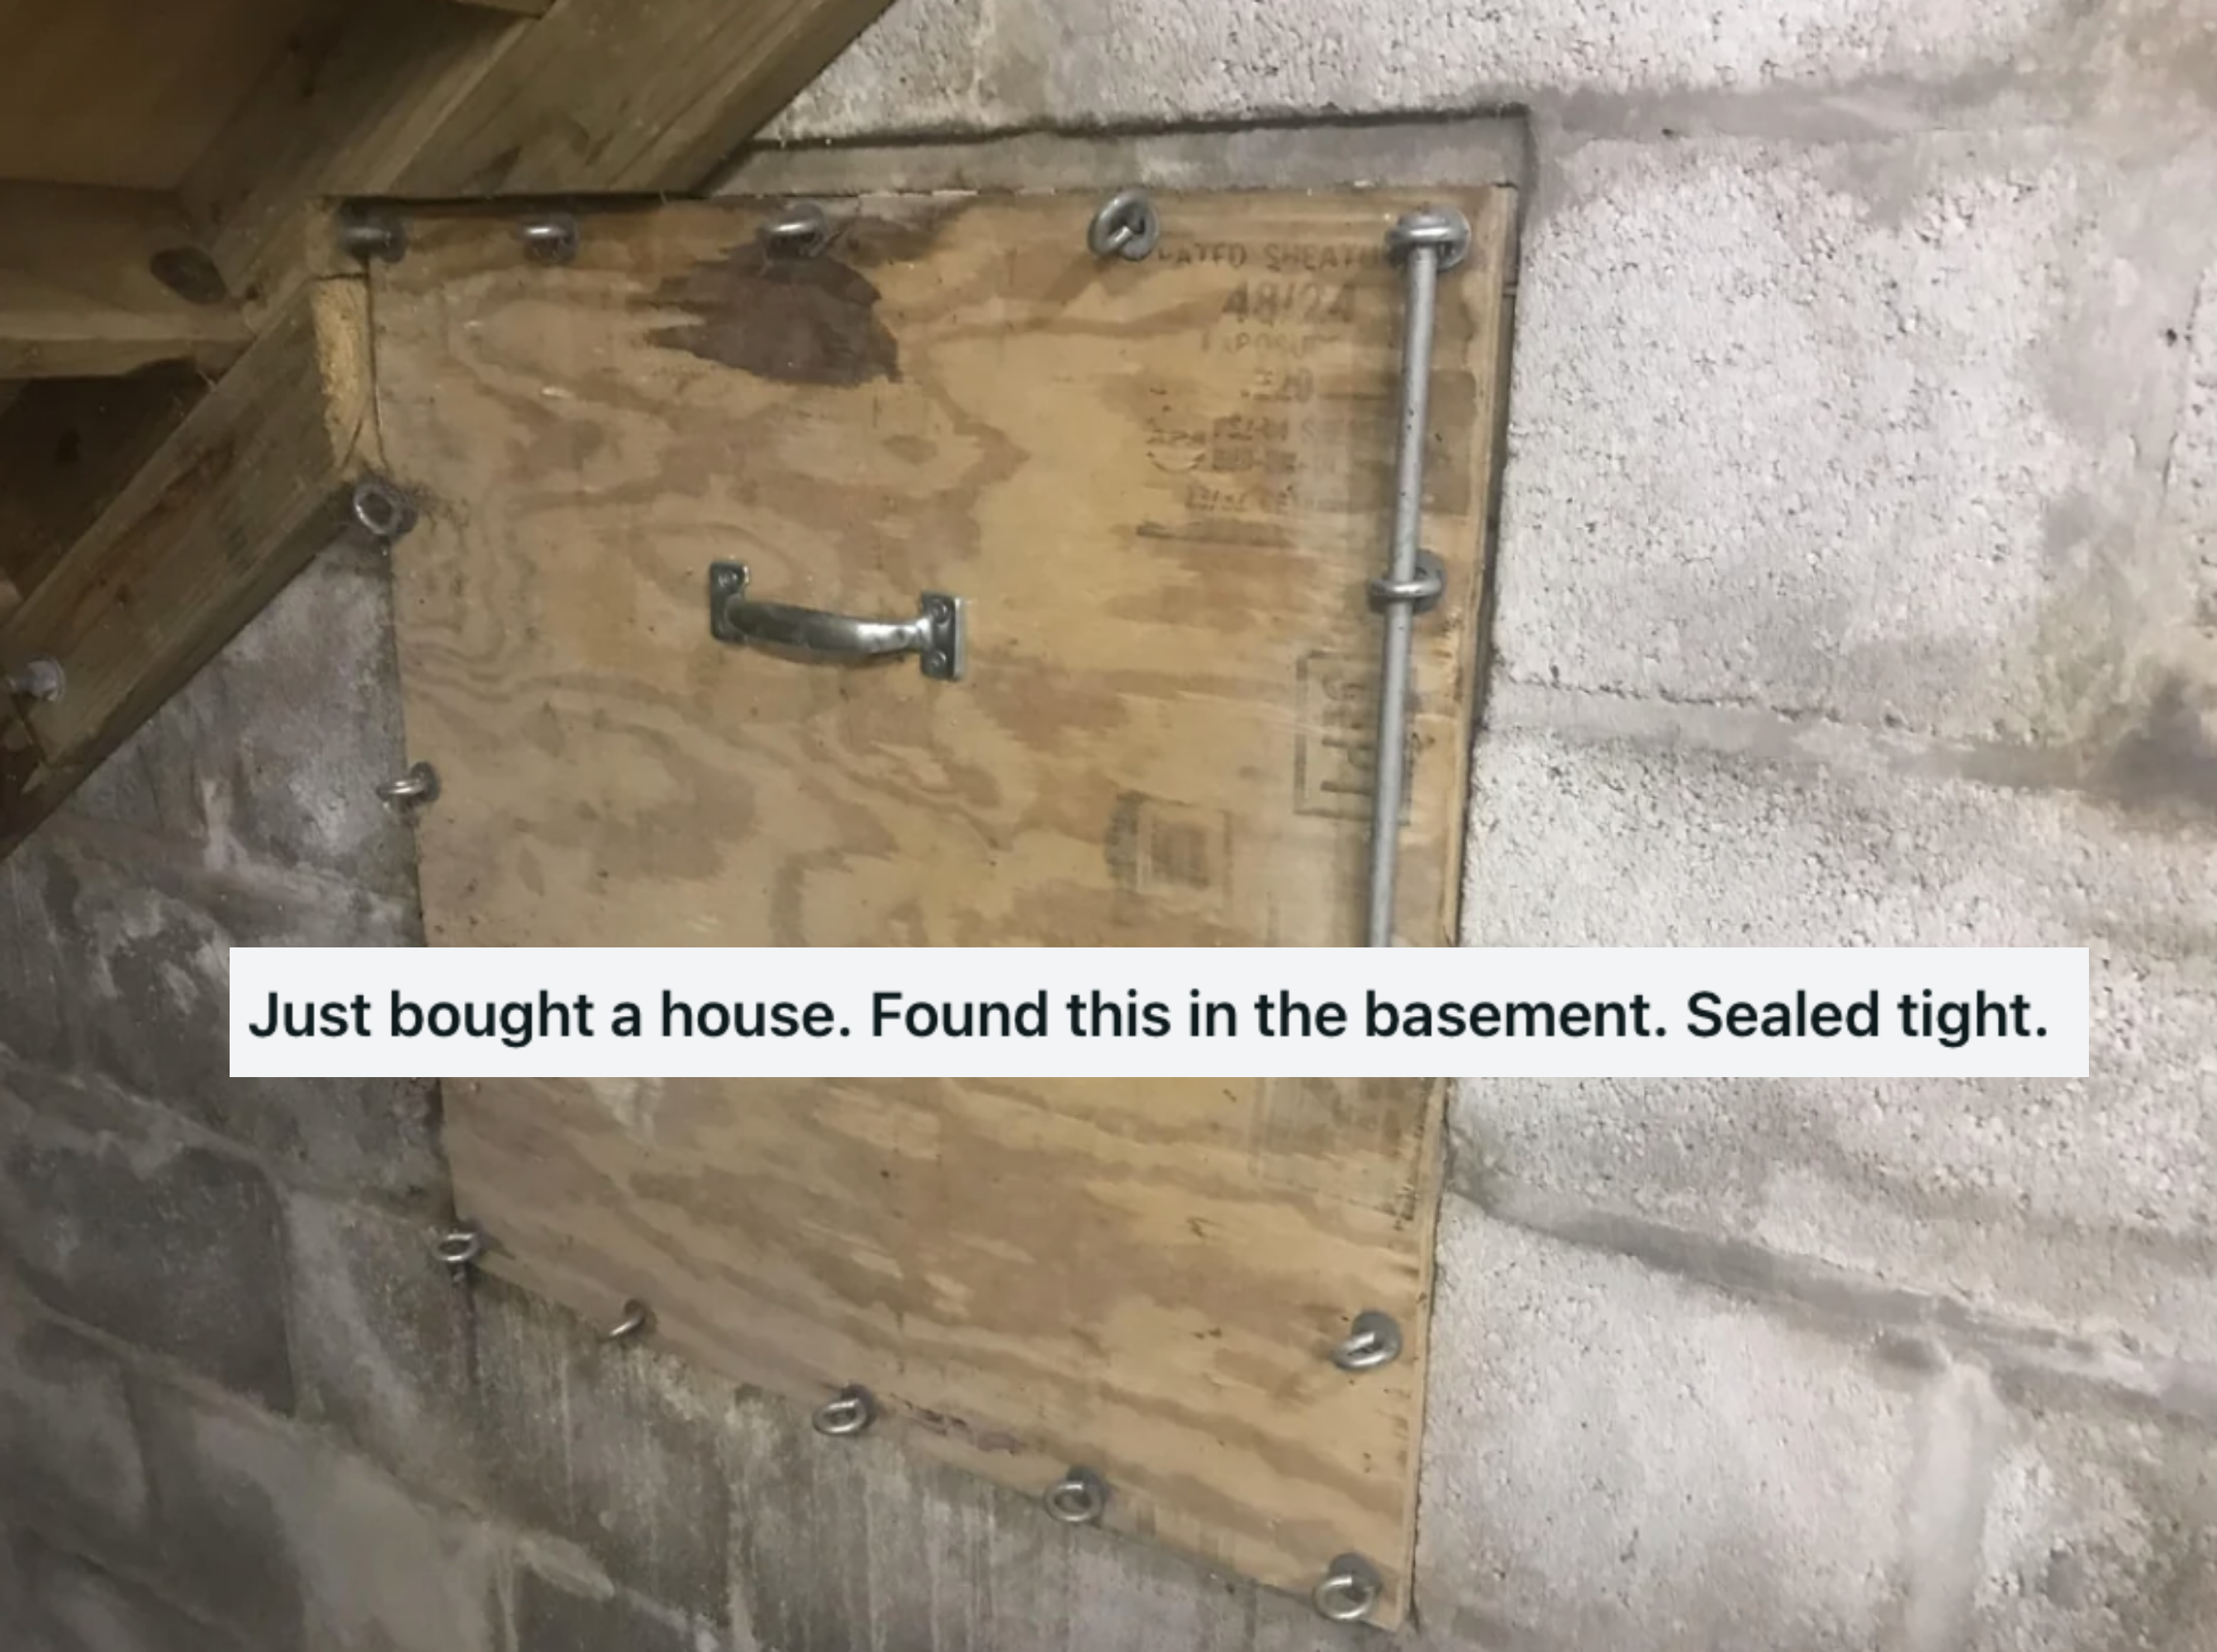 &quot;Just bought a house. Found this in the basement. Sealed tight.&quot;